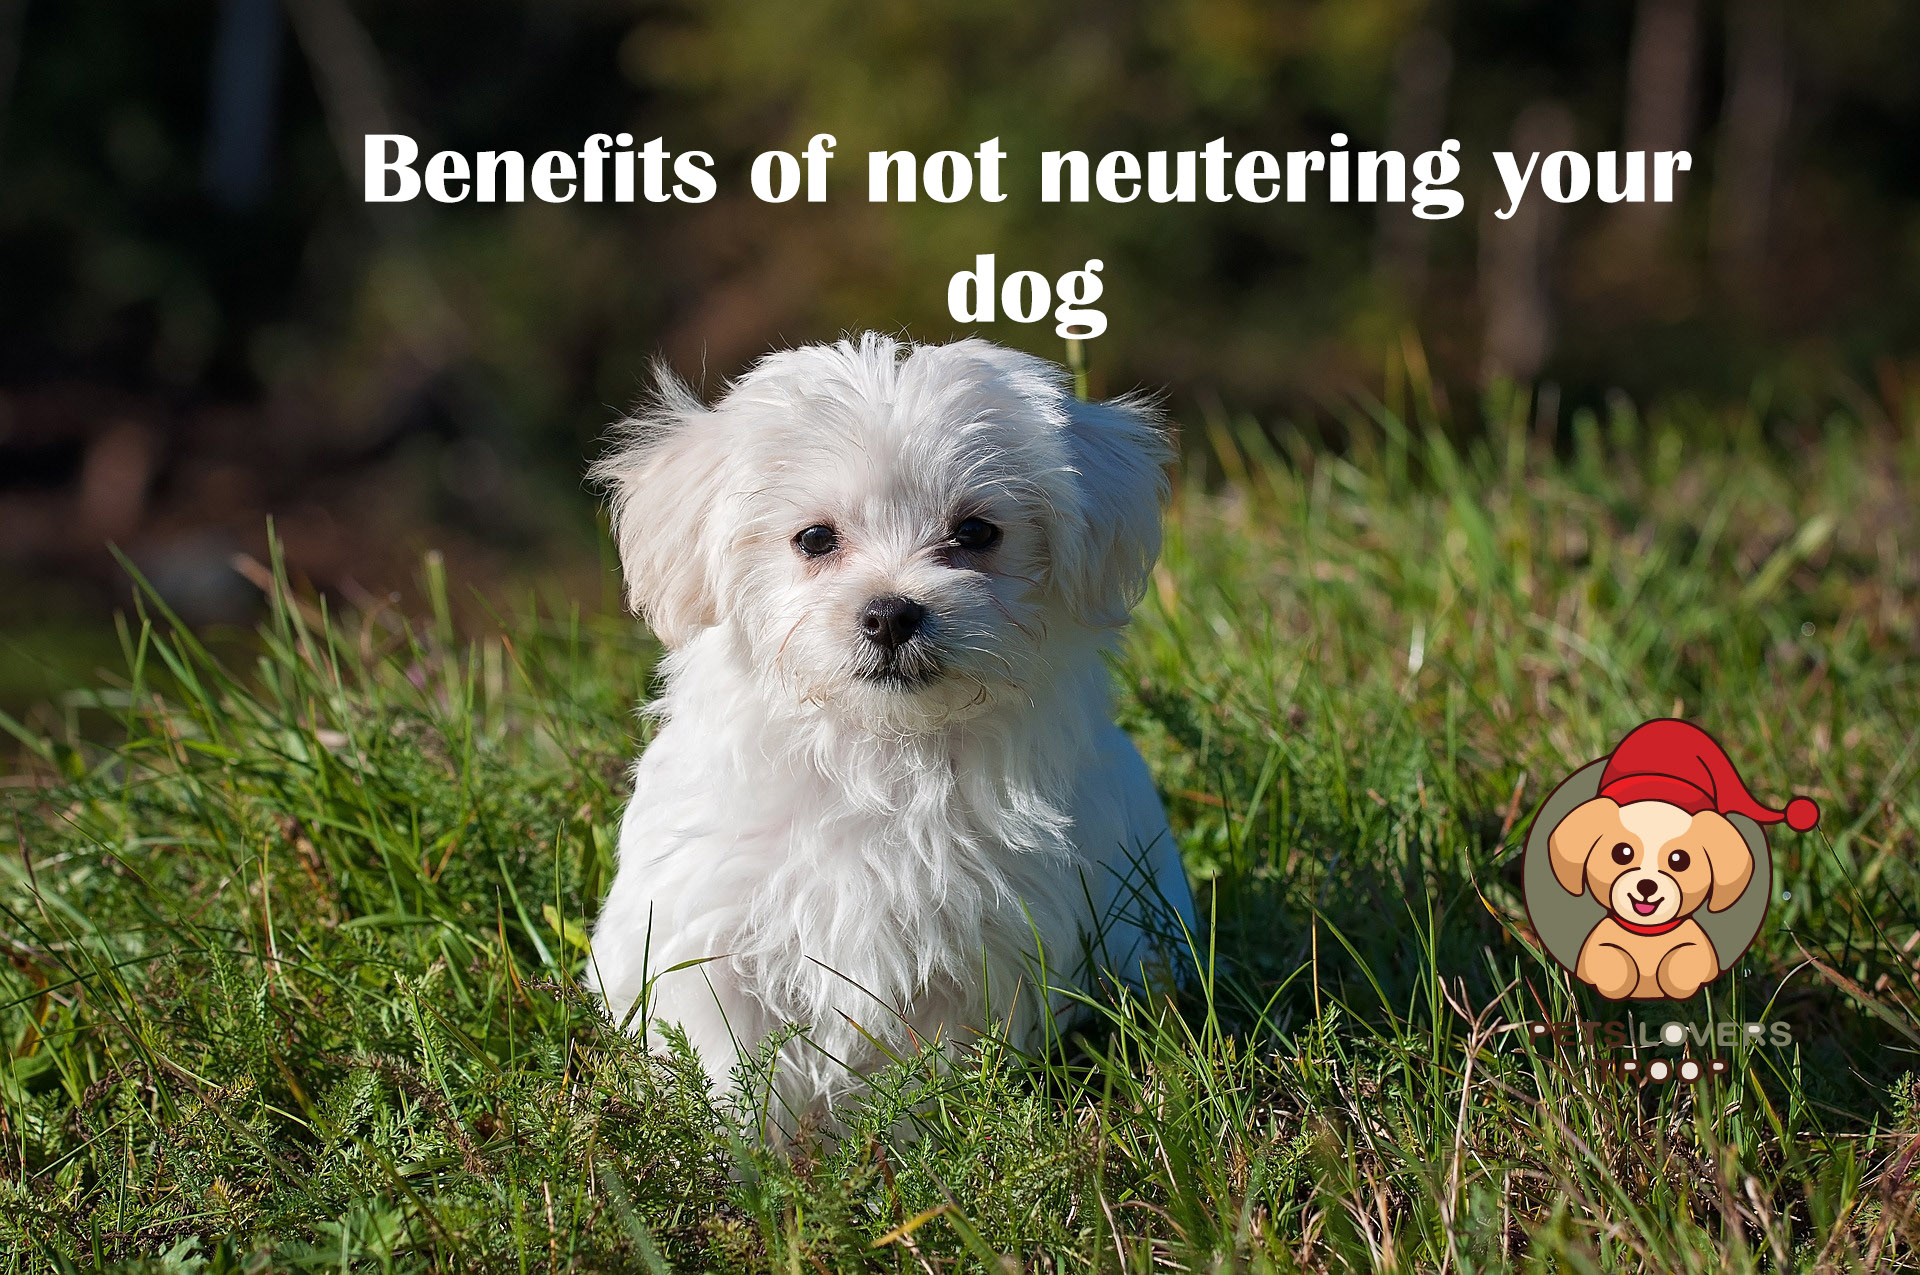 Benefits of not neutering your dog